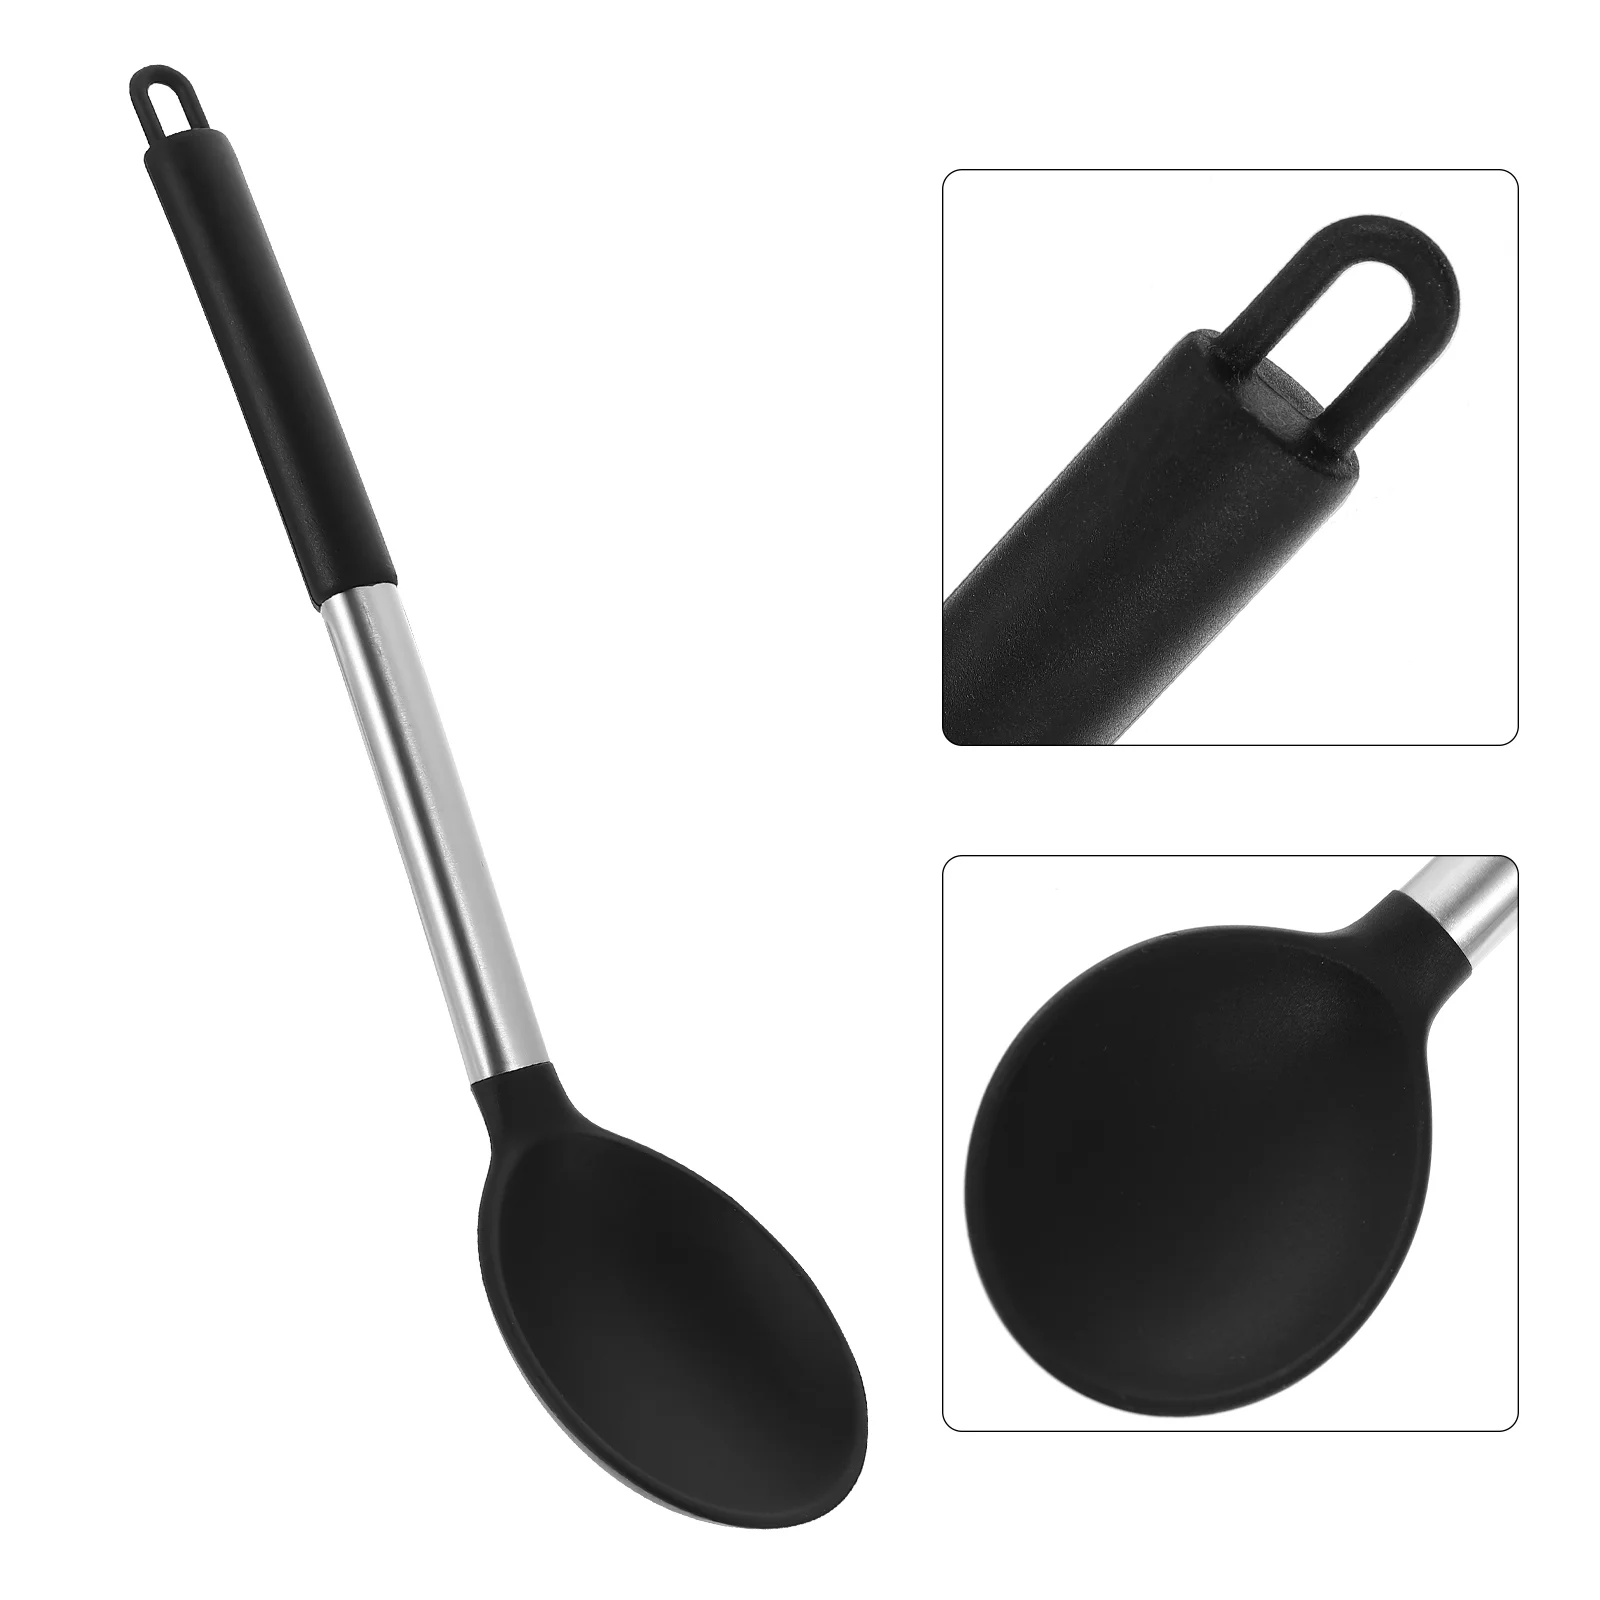 

Nonstick Silicone Spoons Cooking Utensil Kitchen Cookware Spoon Utensils Mixing Spatulas Pan Silicon Tools Turner Serving Baking